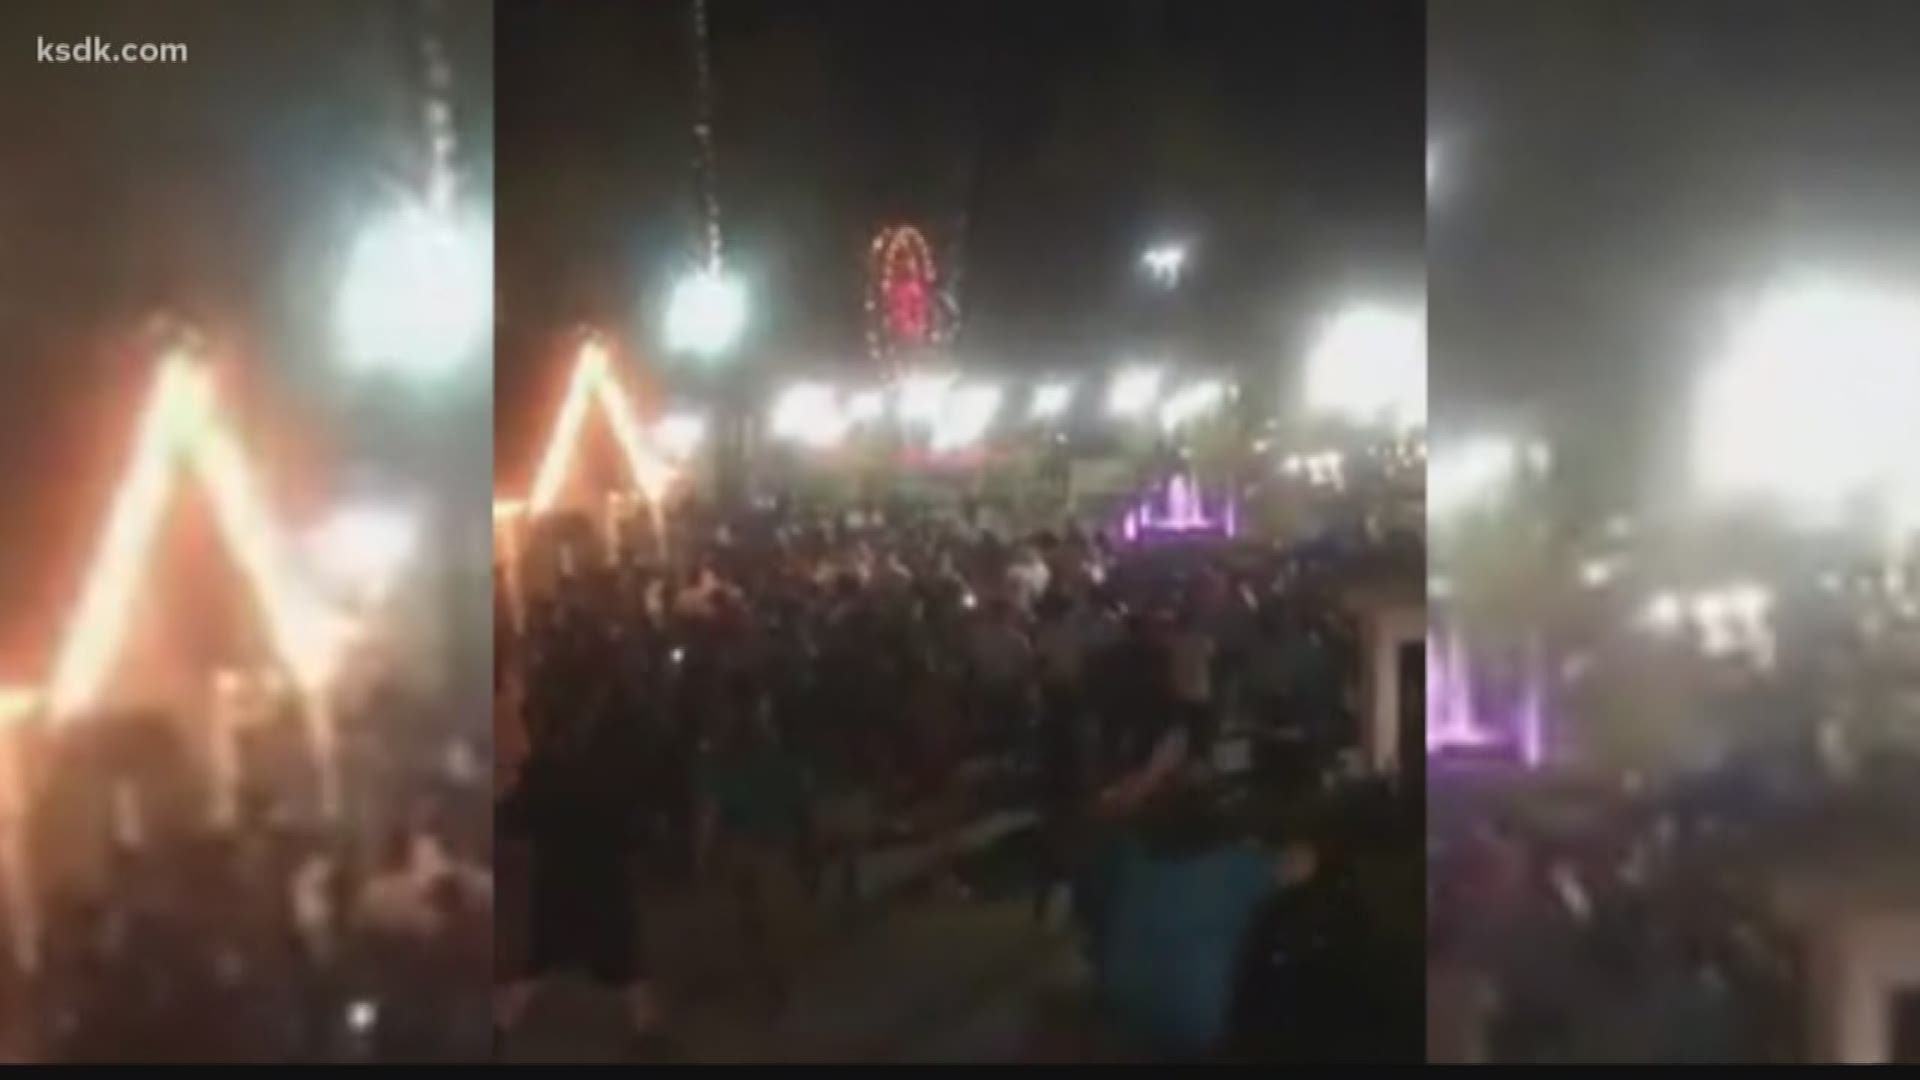 Large brawl involving mostly teenagers at Worlds of Fun in K.C.